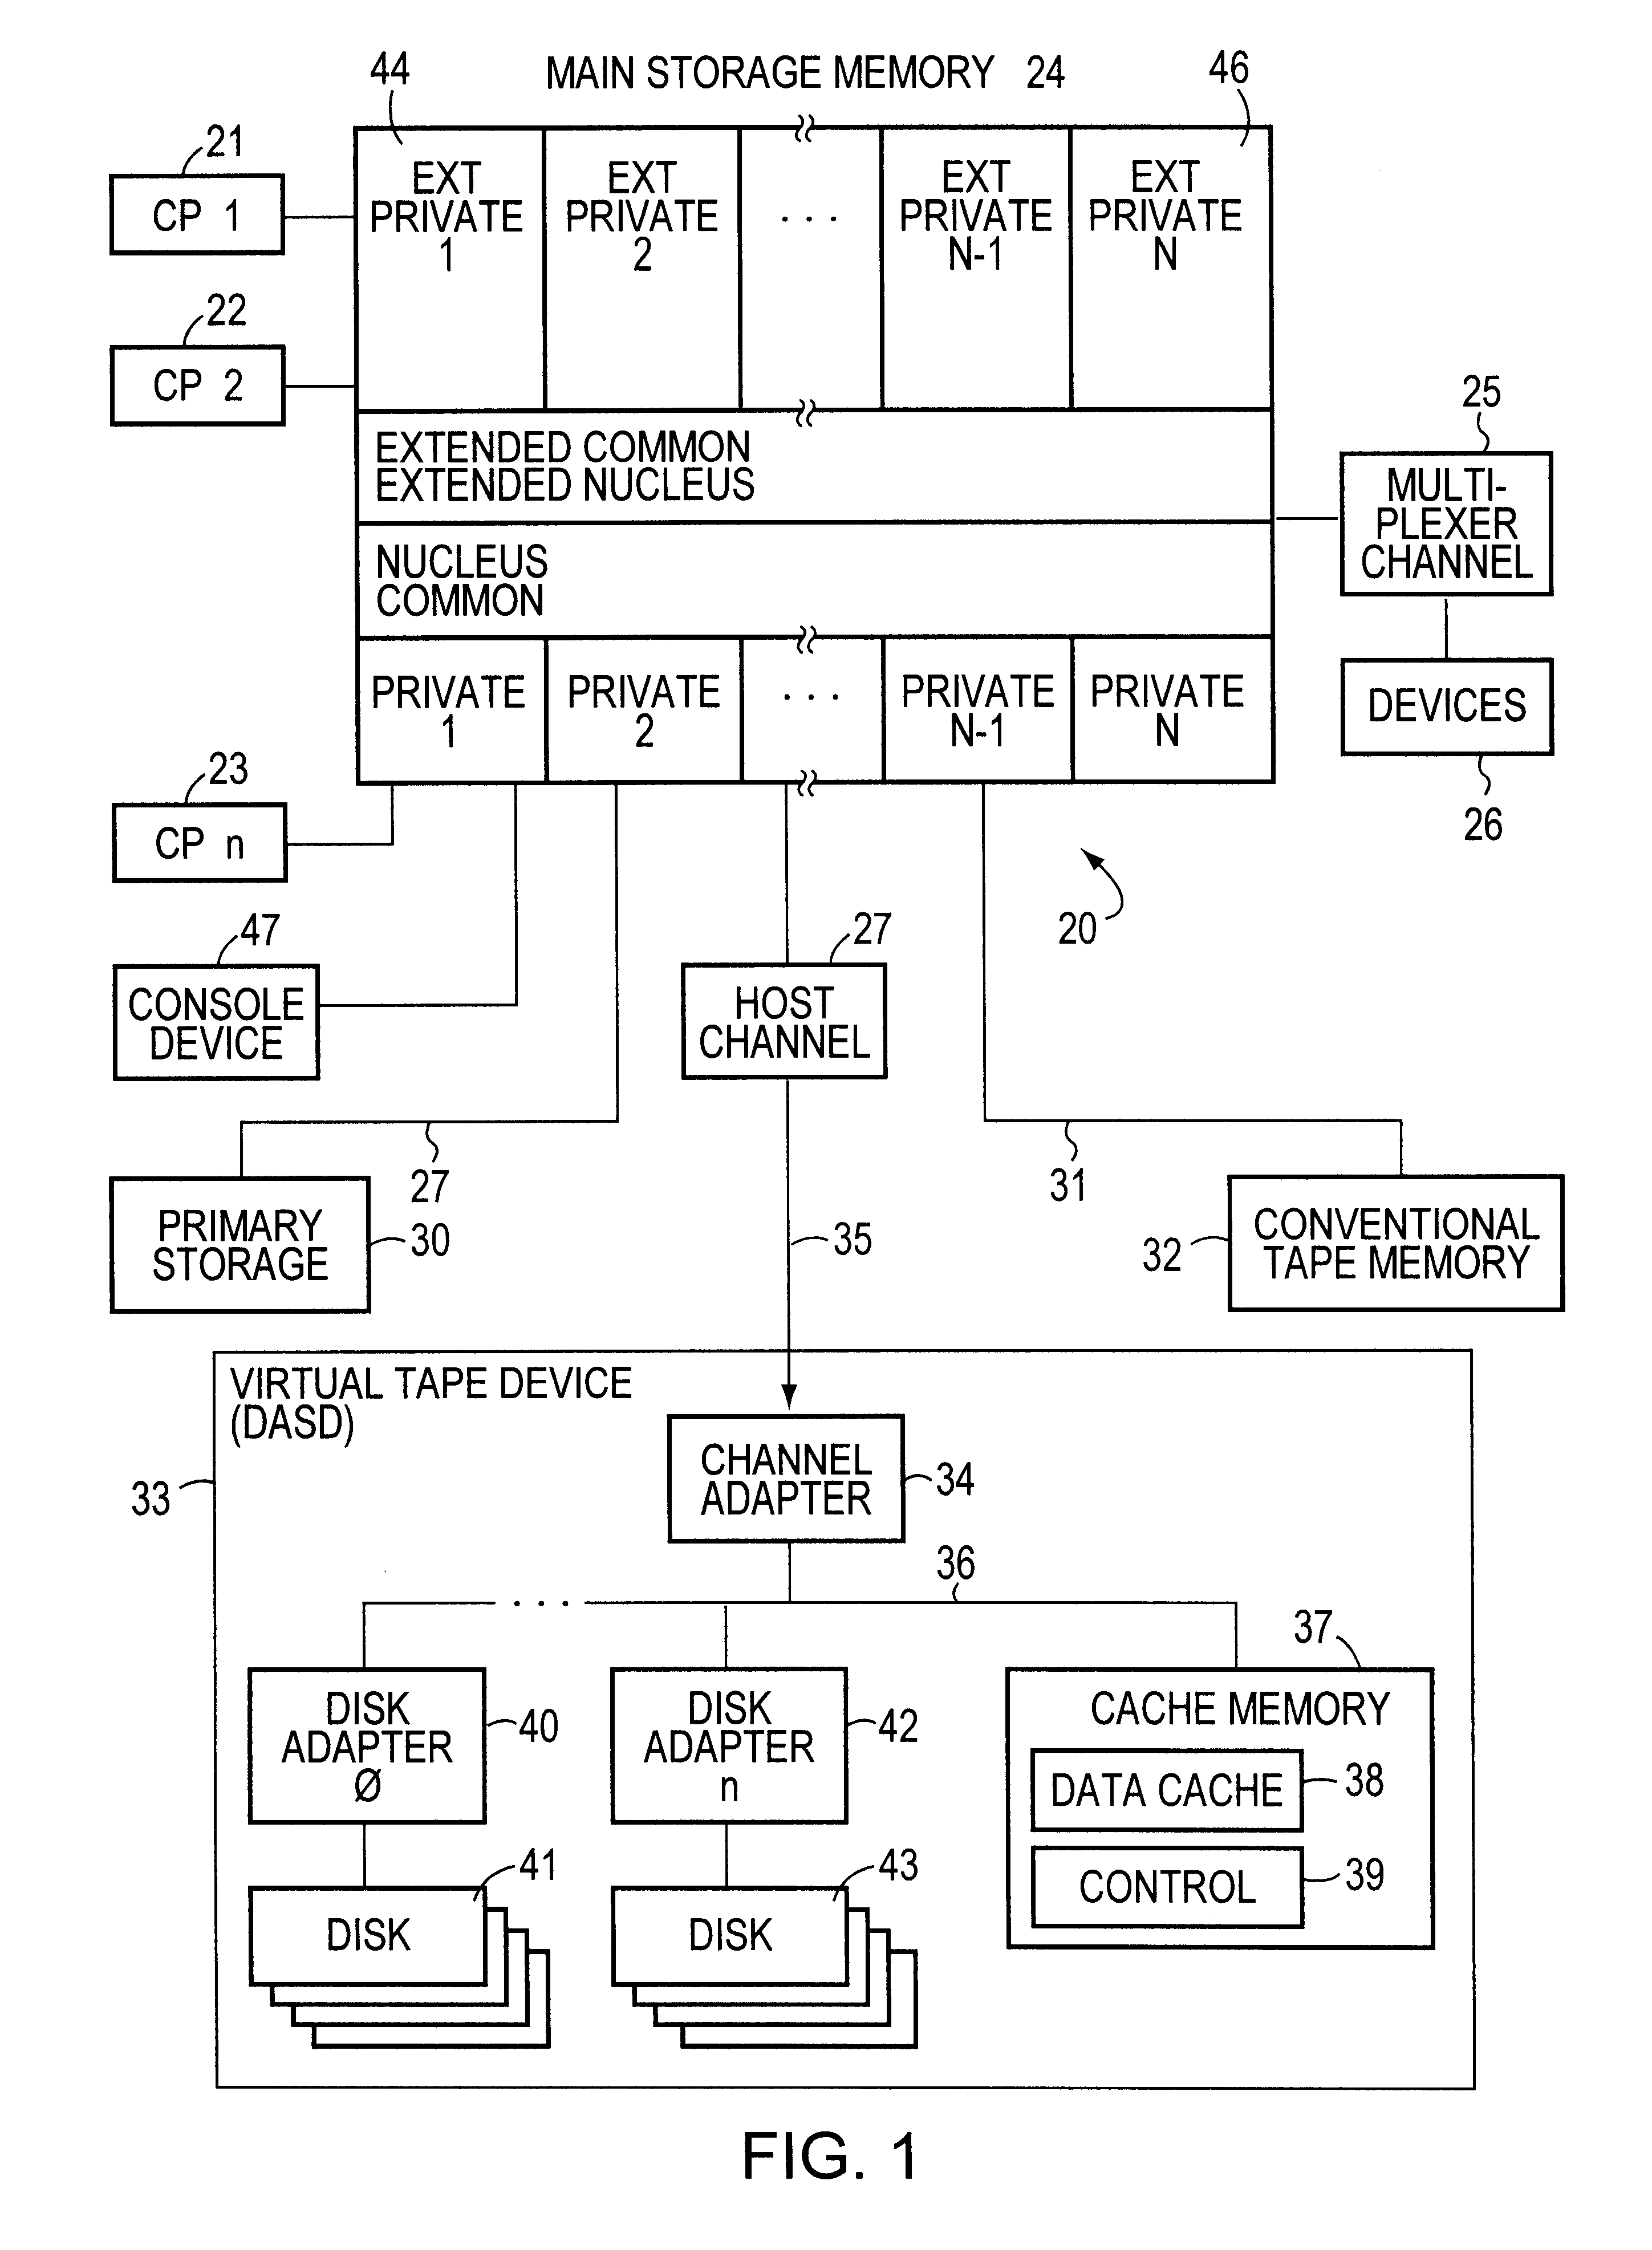 Virtual tape system with variable size